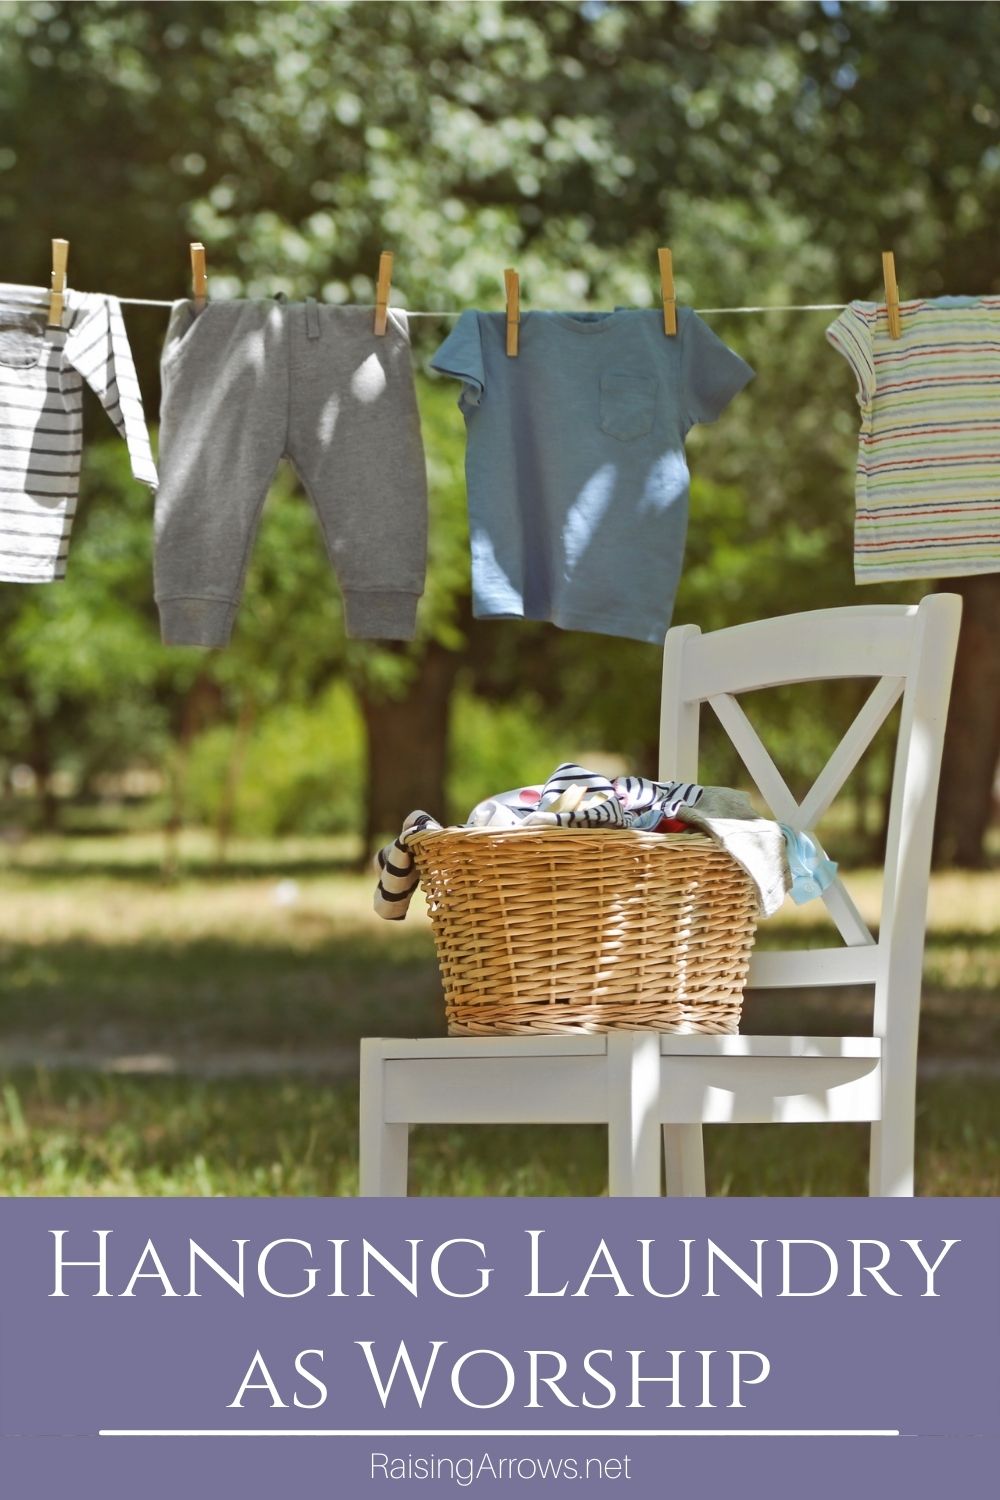 Hanging laundry gives me time to slow down and worship my Creator.